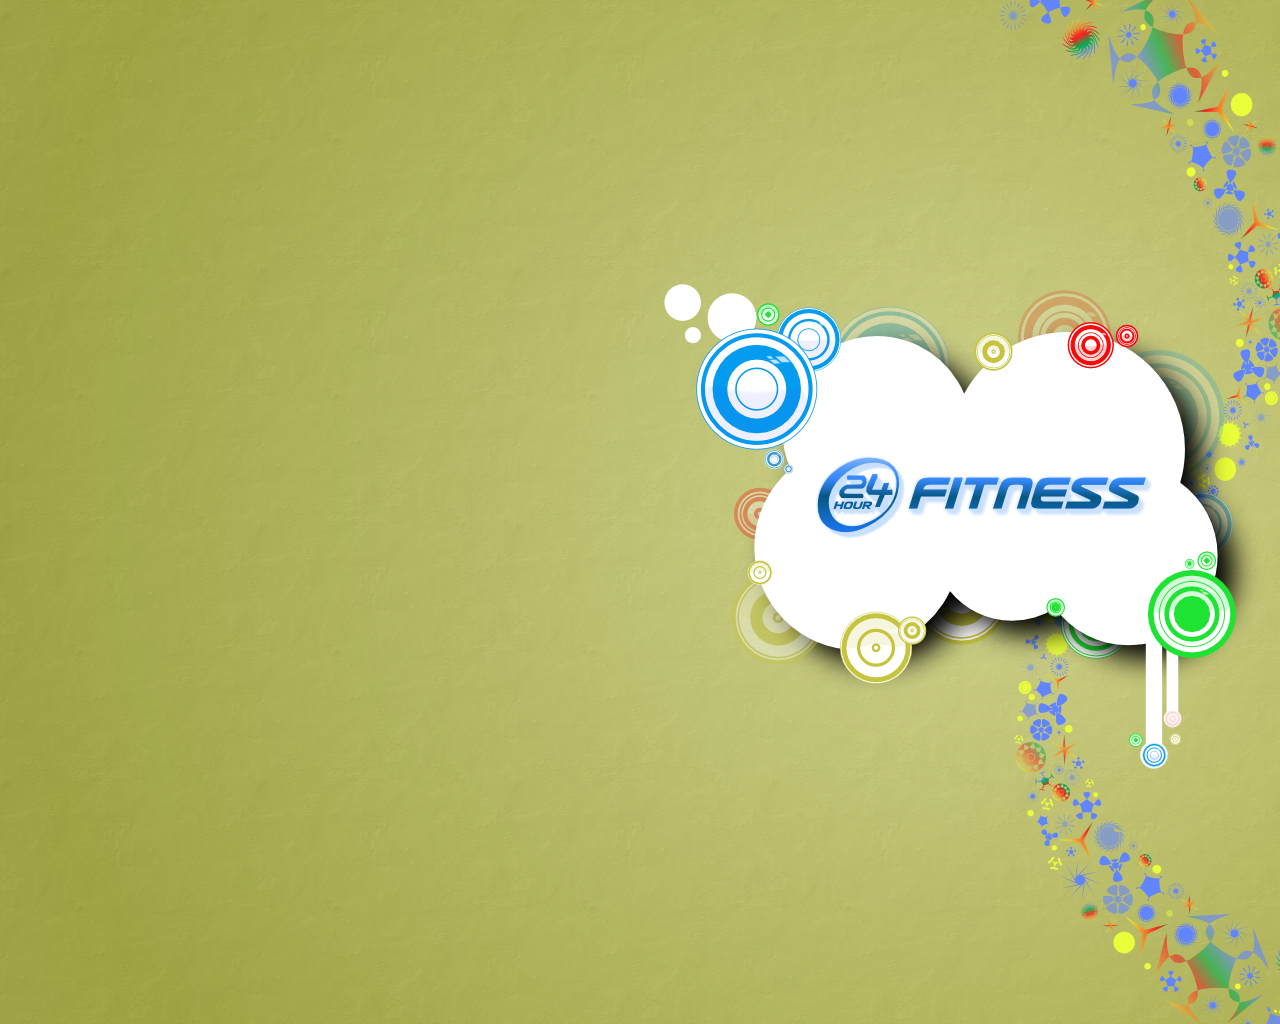 Fitness Background Submited Image